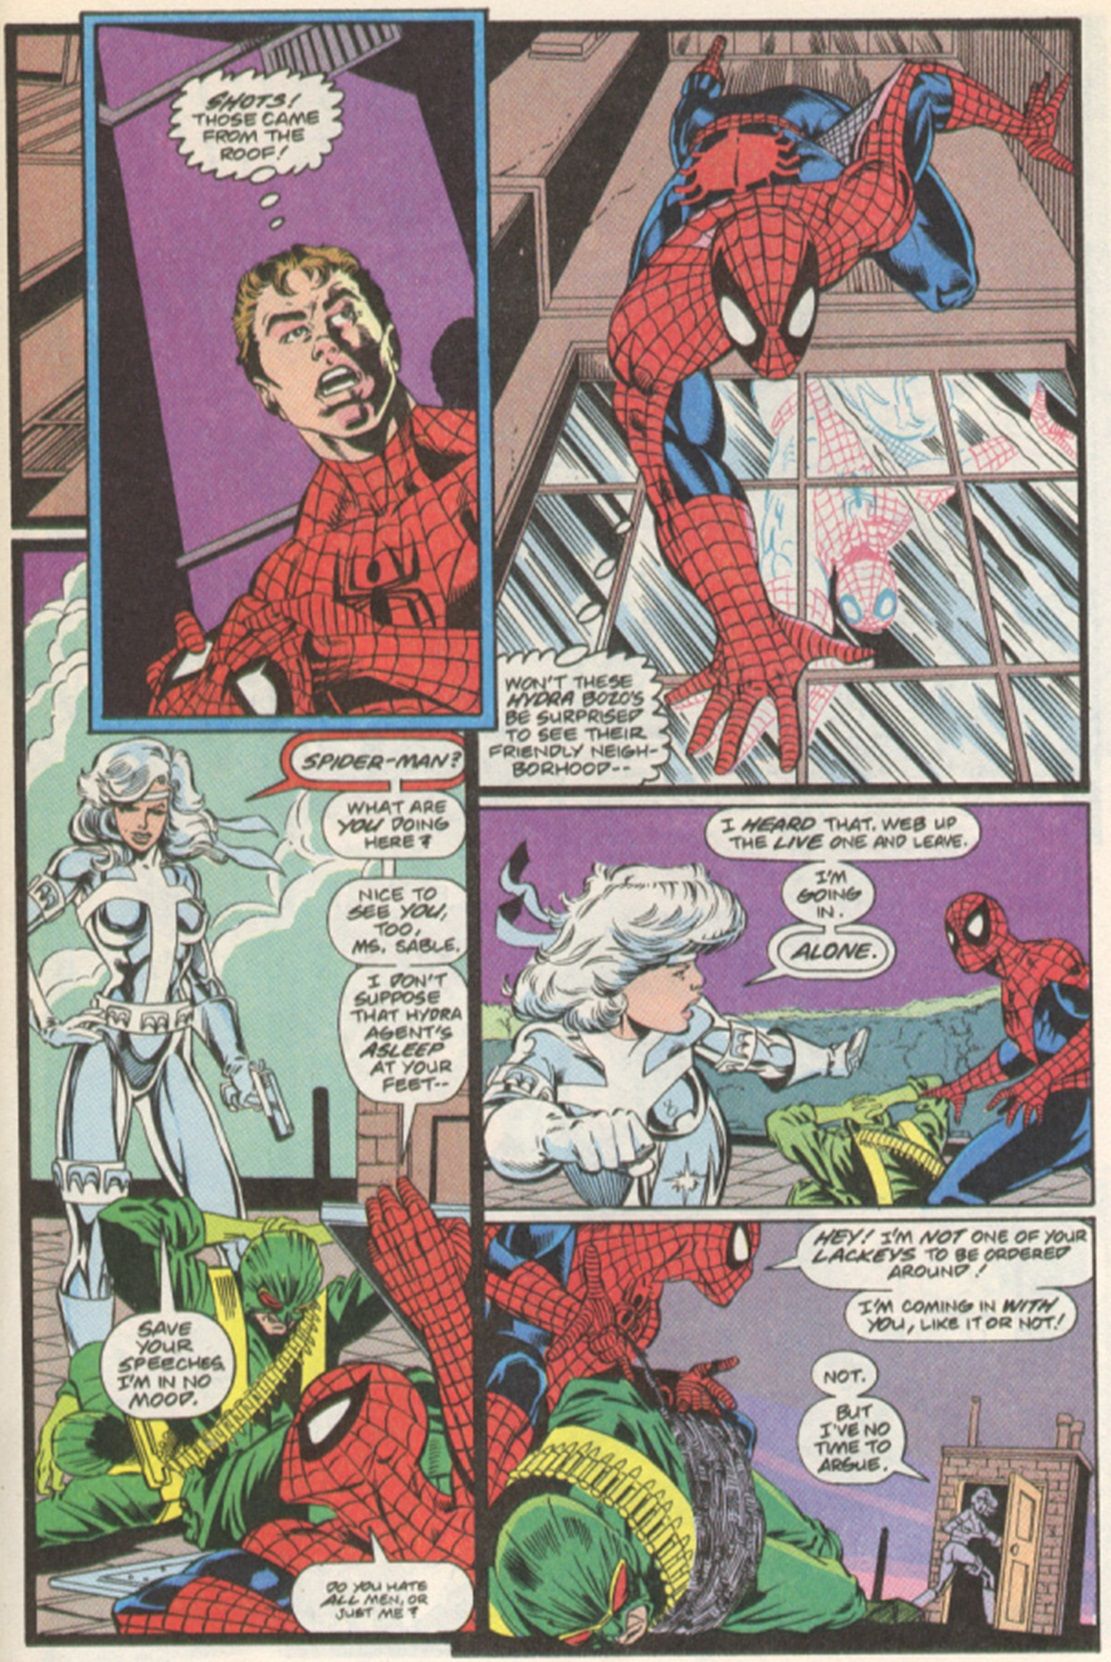 Spider-Man helps Silver Sable out